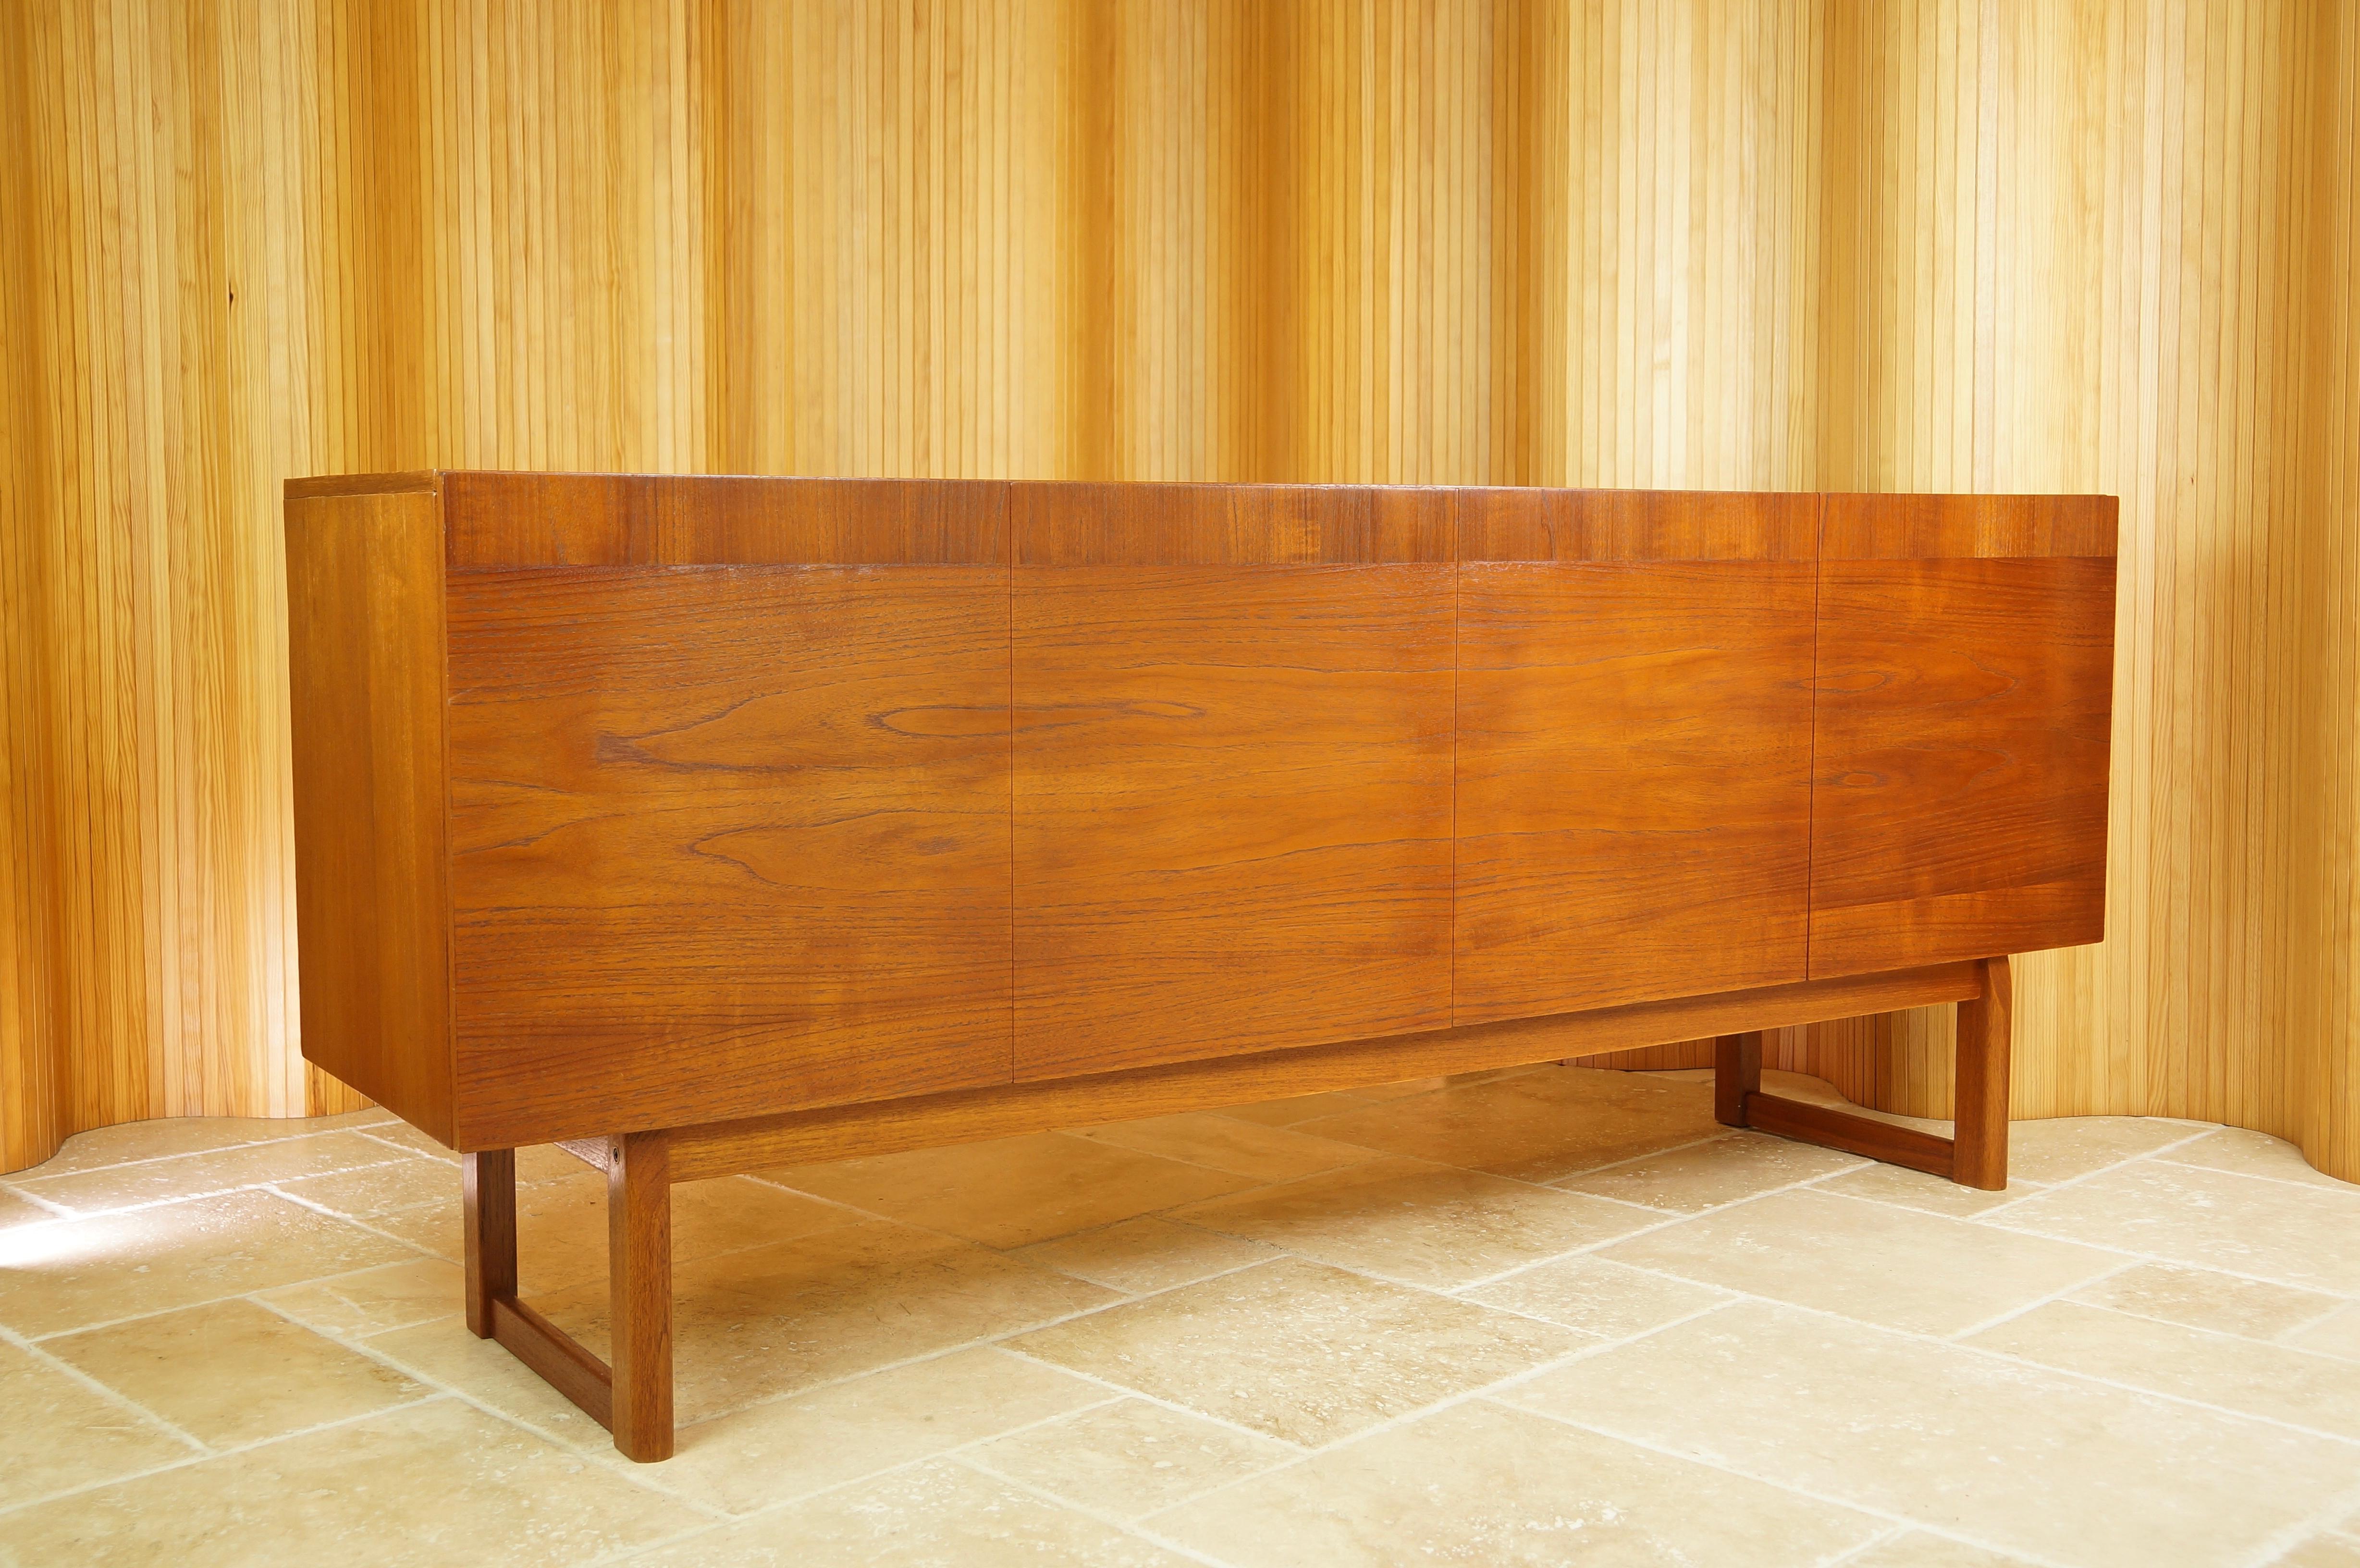 Vintage teak sideboard by Danish Designer Ib Kofod-Larsen for Seffle Möbelfabrik, Sweden, 1960s.

A gorgeous example of this design. It has been restored giving the teak a desirable richness and lustre.

The clean lines give it a contemporary